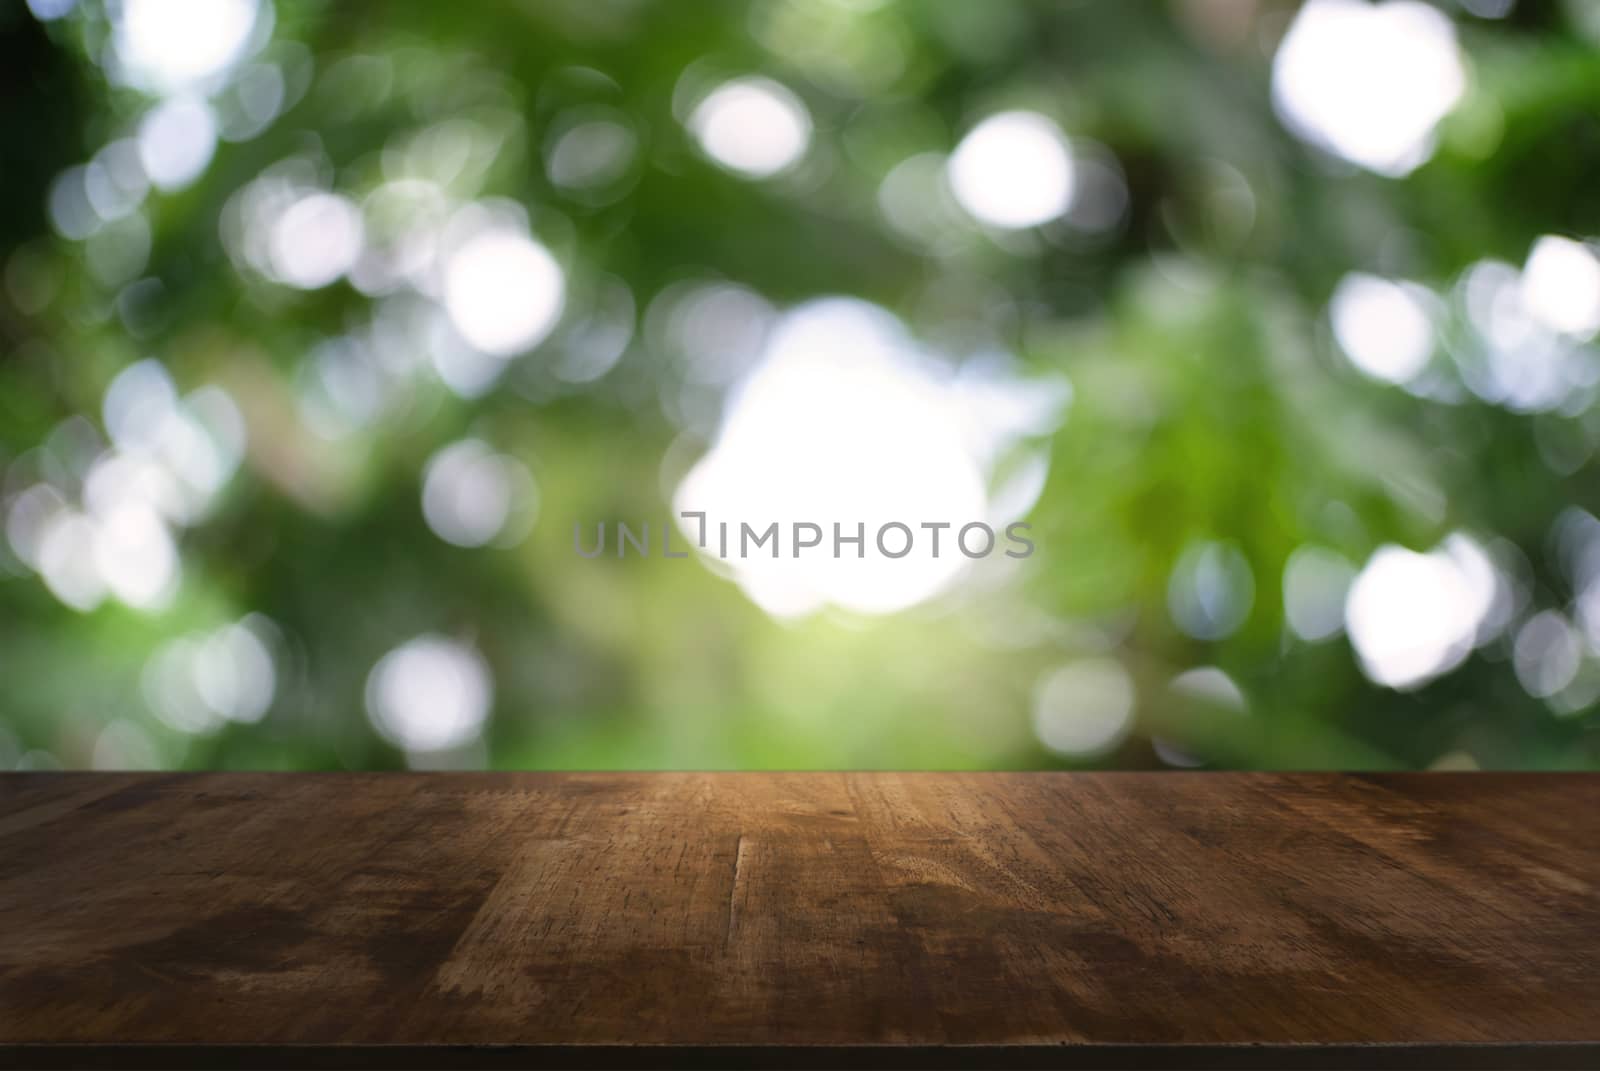 Image of dark wooden table in front of abstract blurred background of outdoor garden lights. can be used for display or montage your products.Mock up for display of product